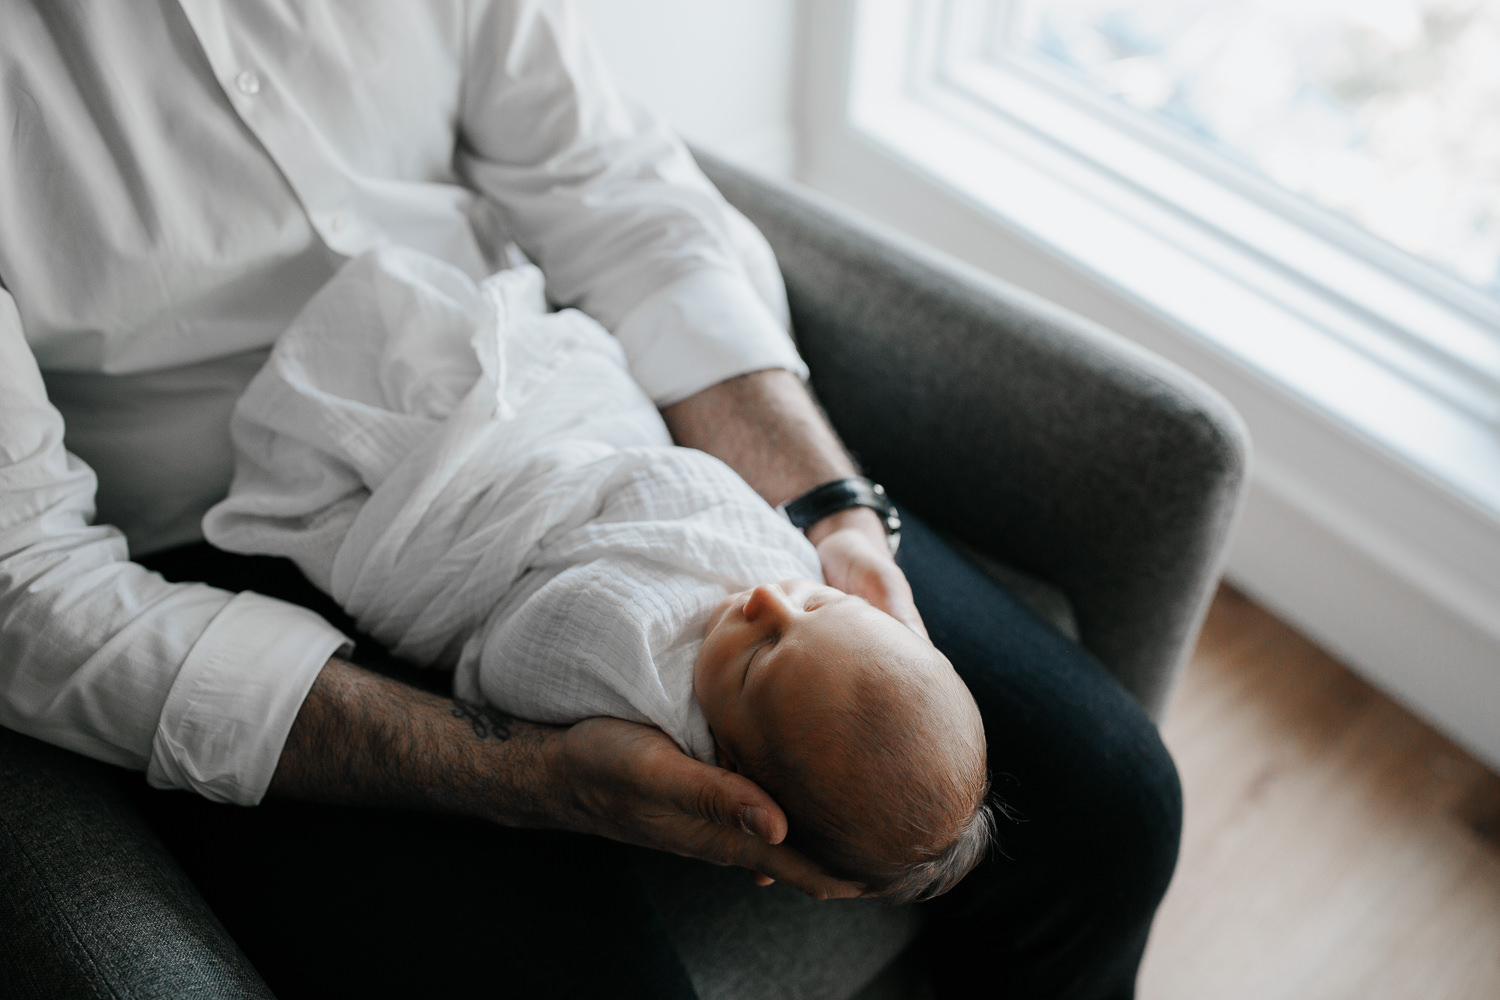 new dad sitting in nursery rocking chair, holding sleeping 2 week old baby boy in his arms - Stouffville Lifestyle Photography